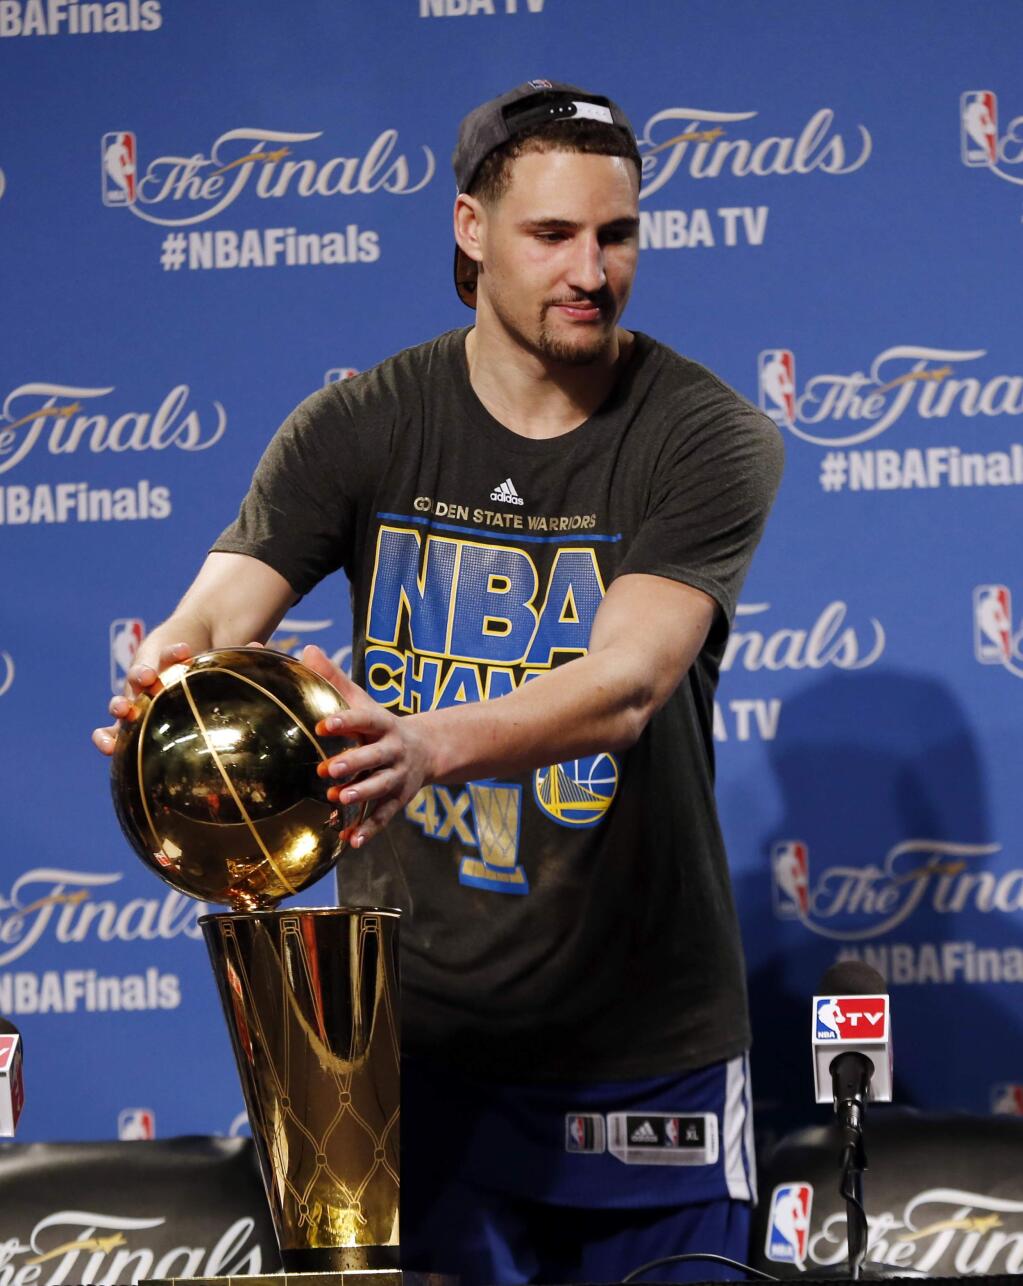 Golden State Warriors guard Klay Thompson (11) responds to a question during a news conference following Game 6 of basketball's NBA Finals against the Cleveland Cavaliers, in Cleveland, Wednesday, June 17, 2015. The Warriors defeated the Cavaliers 105-97 to win the best-of-seven game series 4-2. . (AP Photo/Paul Sancya)